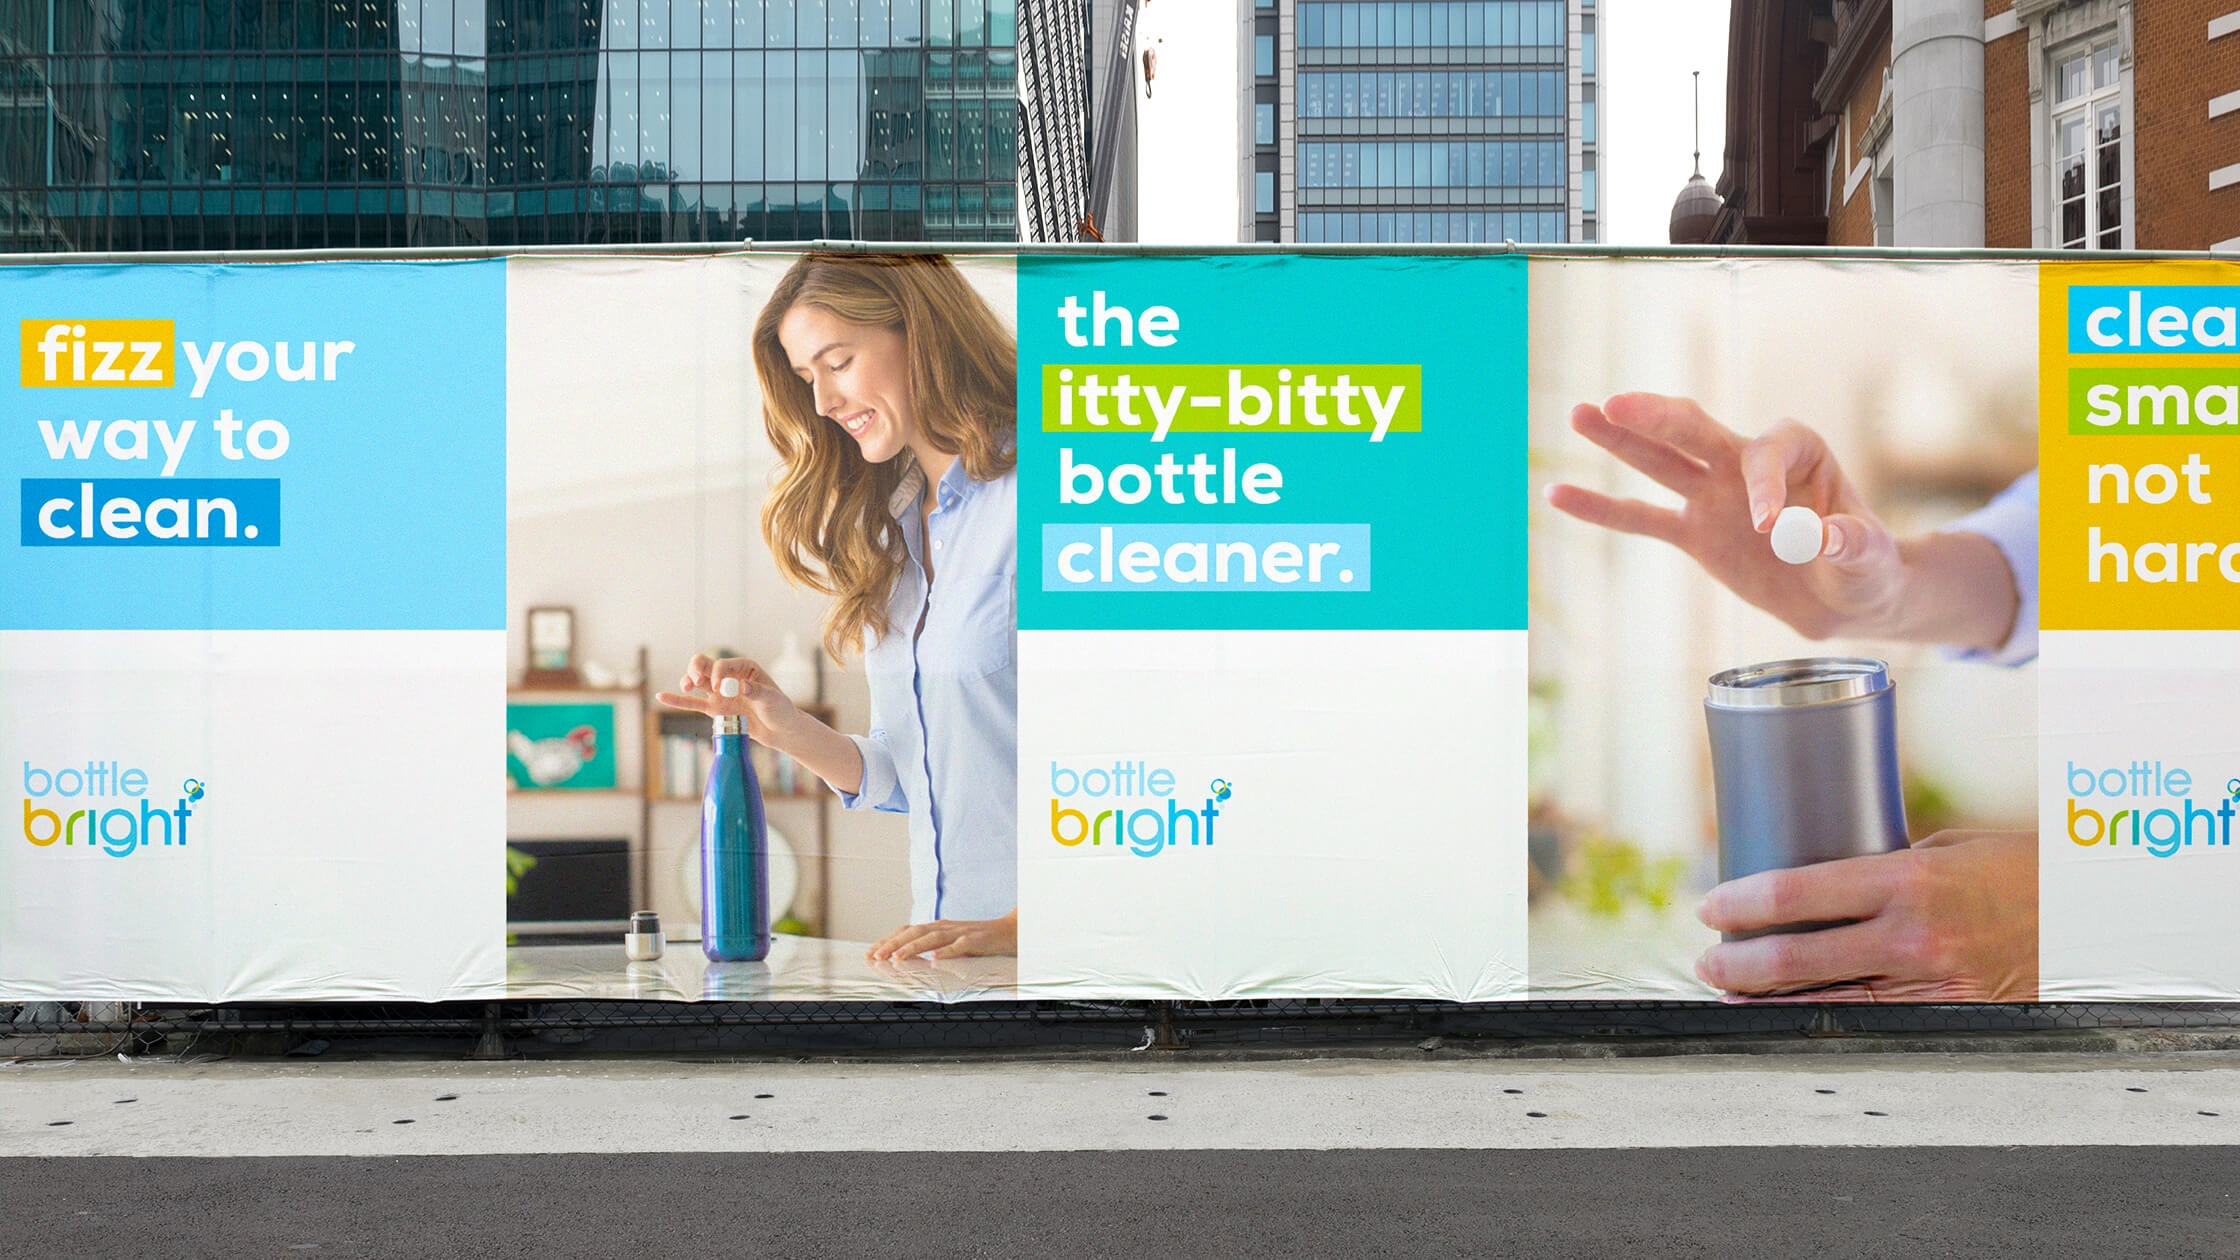 Bottle Bright advertising campaign